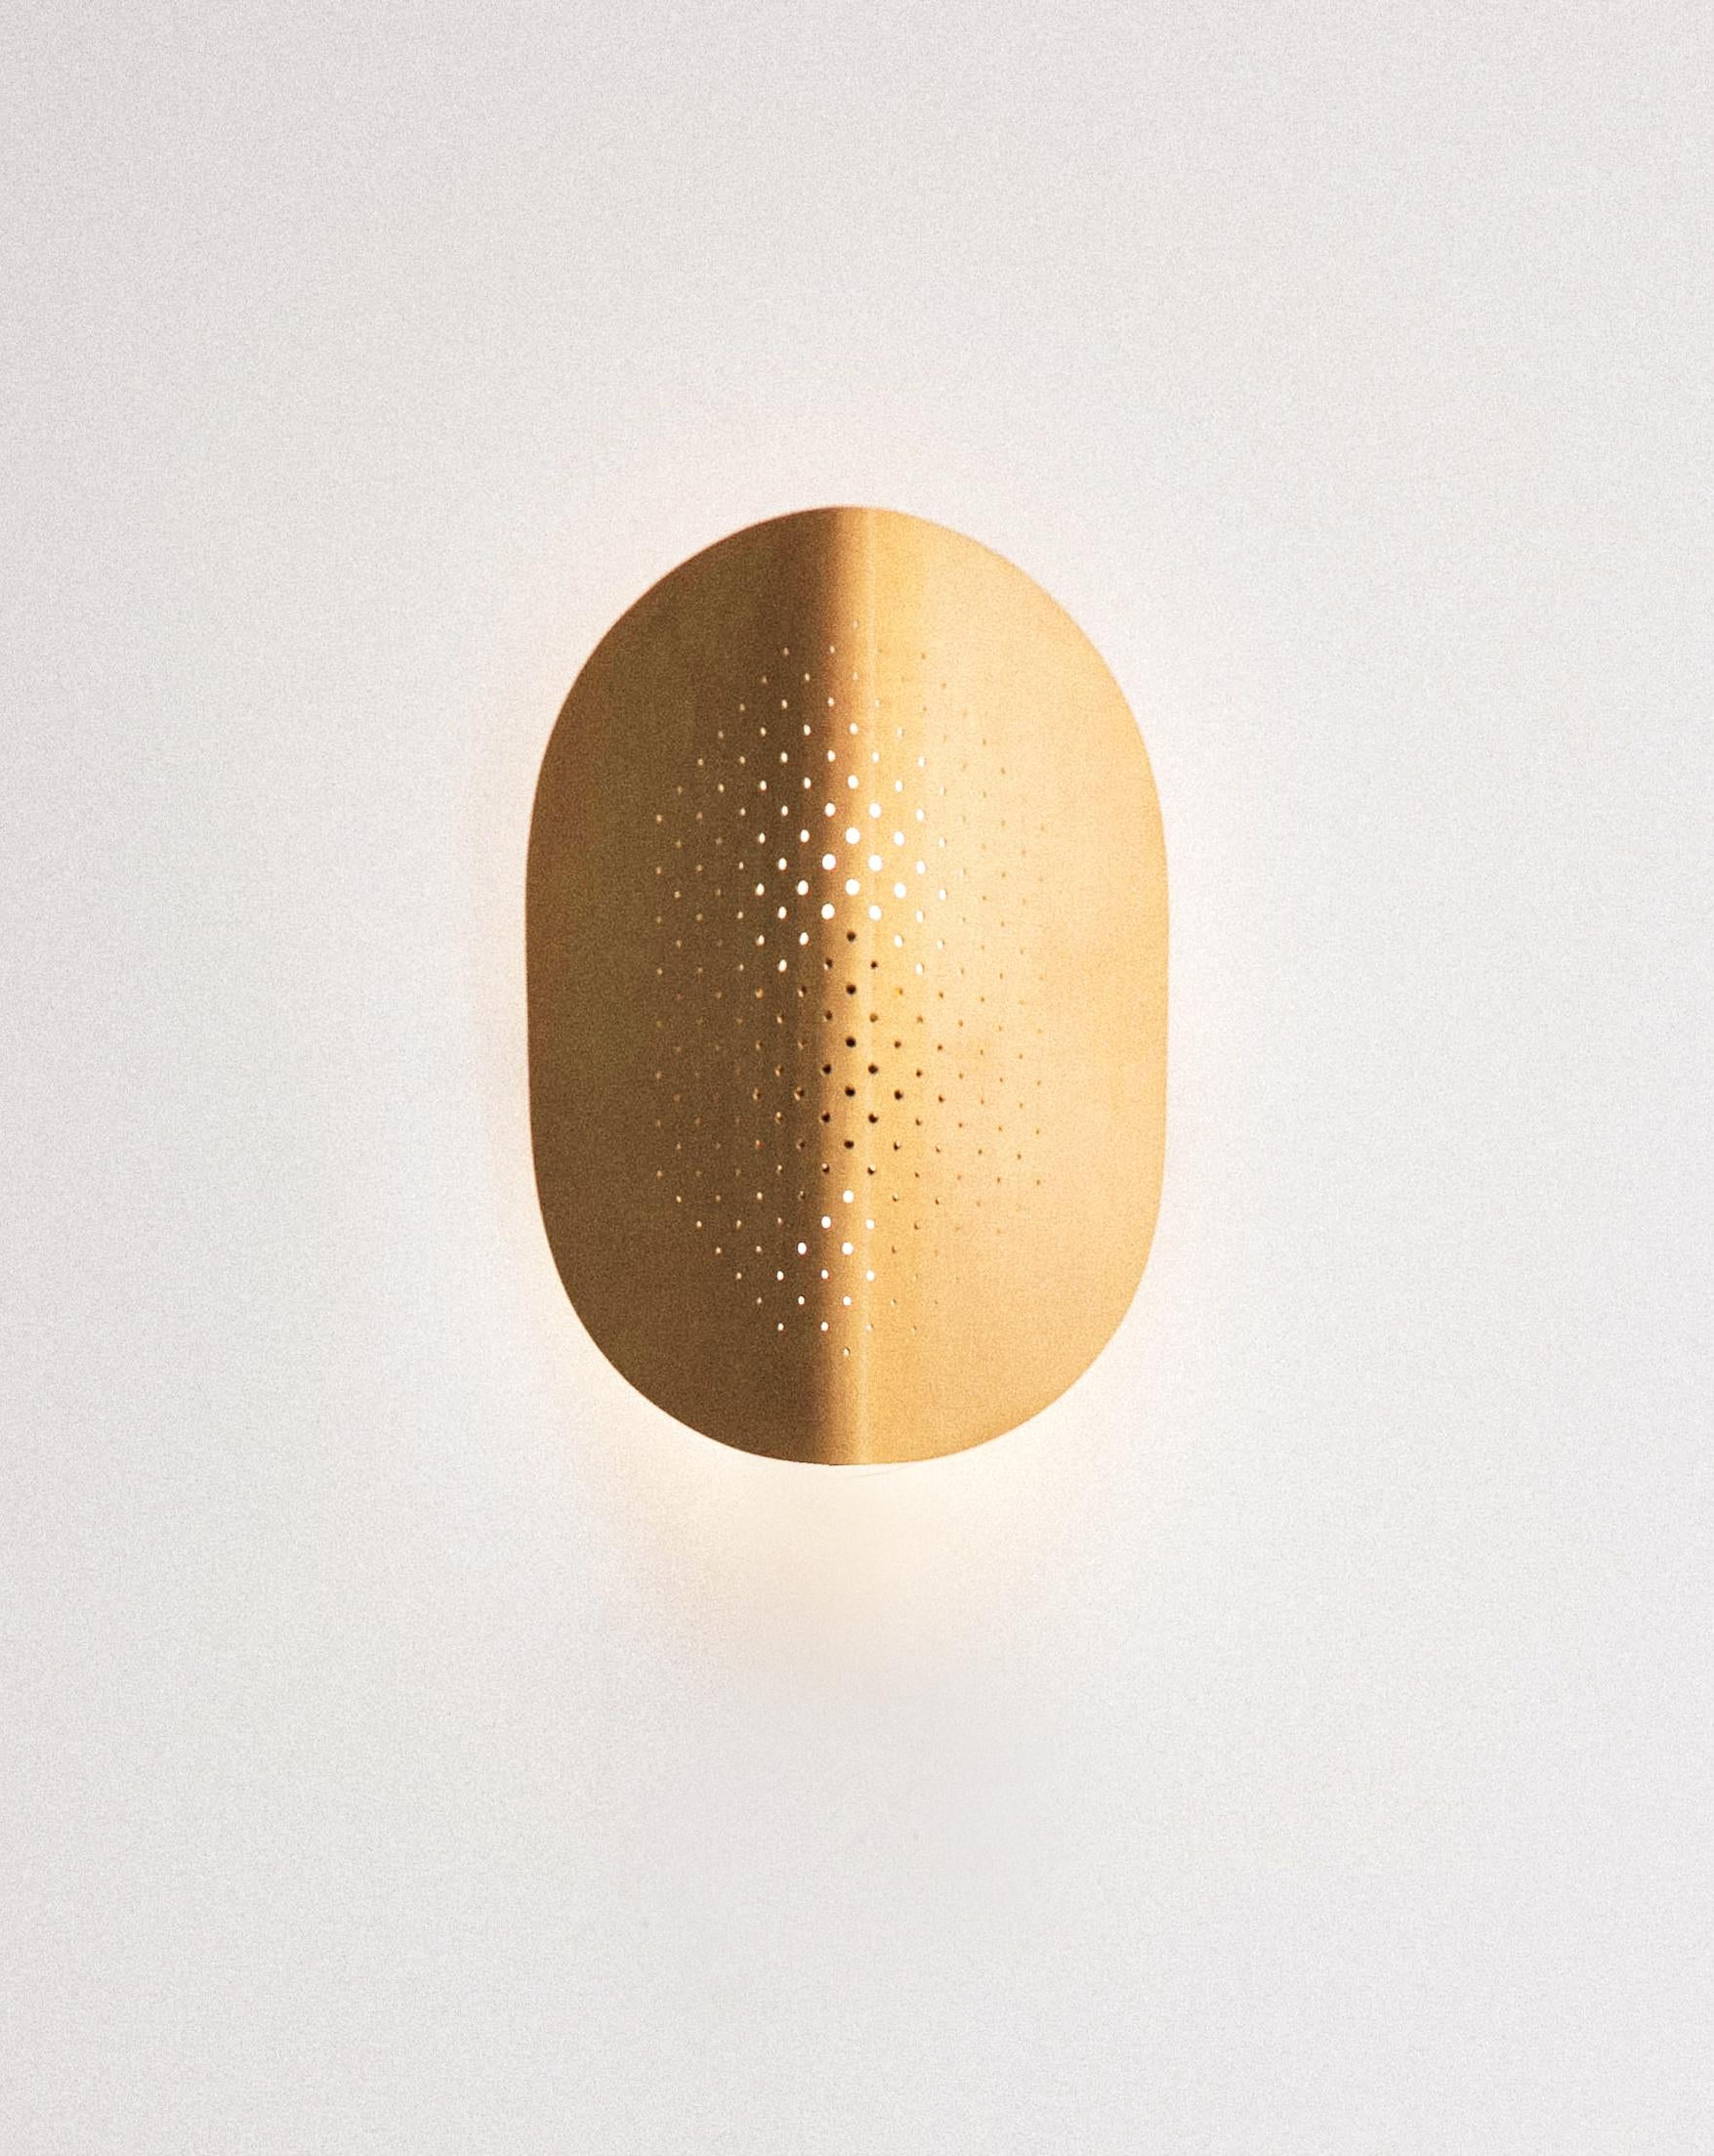 Moon applique by SB26
Dimensions : W 20 x D 10.5 x H 30 cm
Materials : Steel, brass gilded with pure gold

This wall lamp Moon, in the spirit of the range, reveals its graphic game by the light. The entire steel structure has a hematite finish